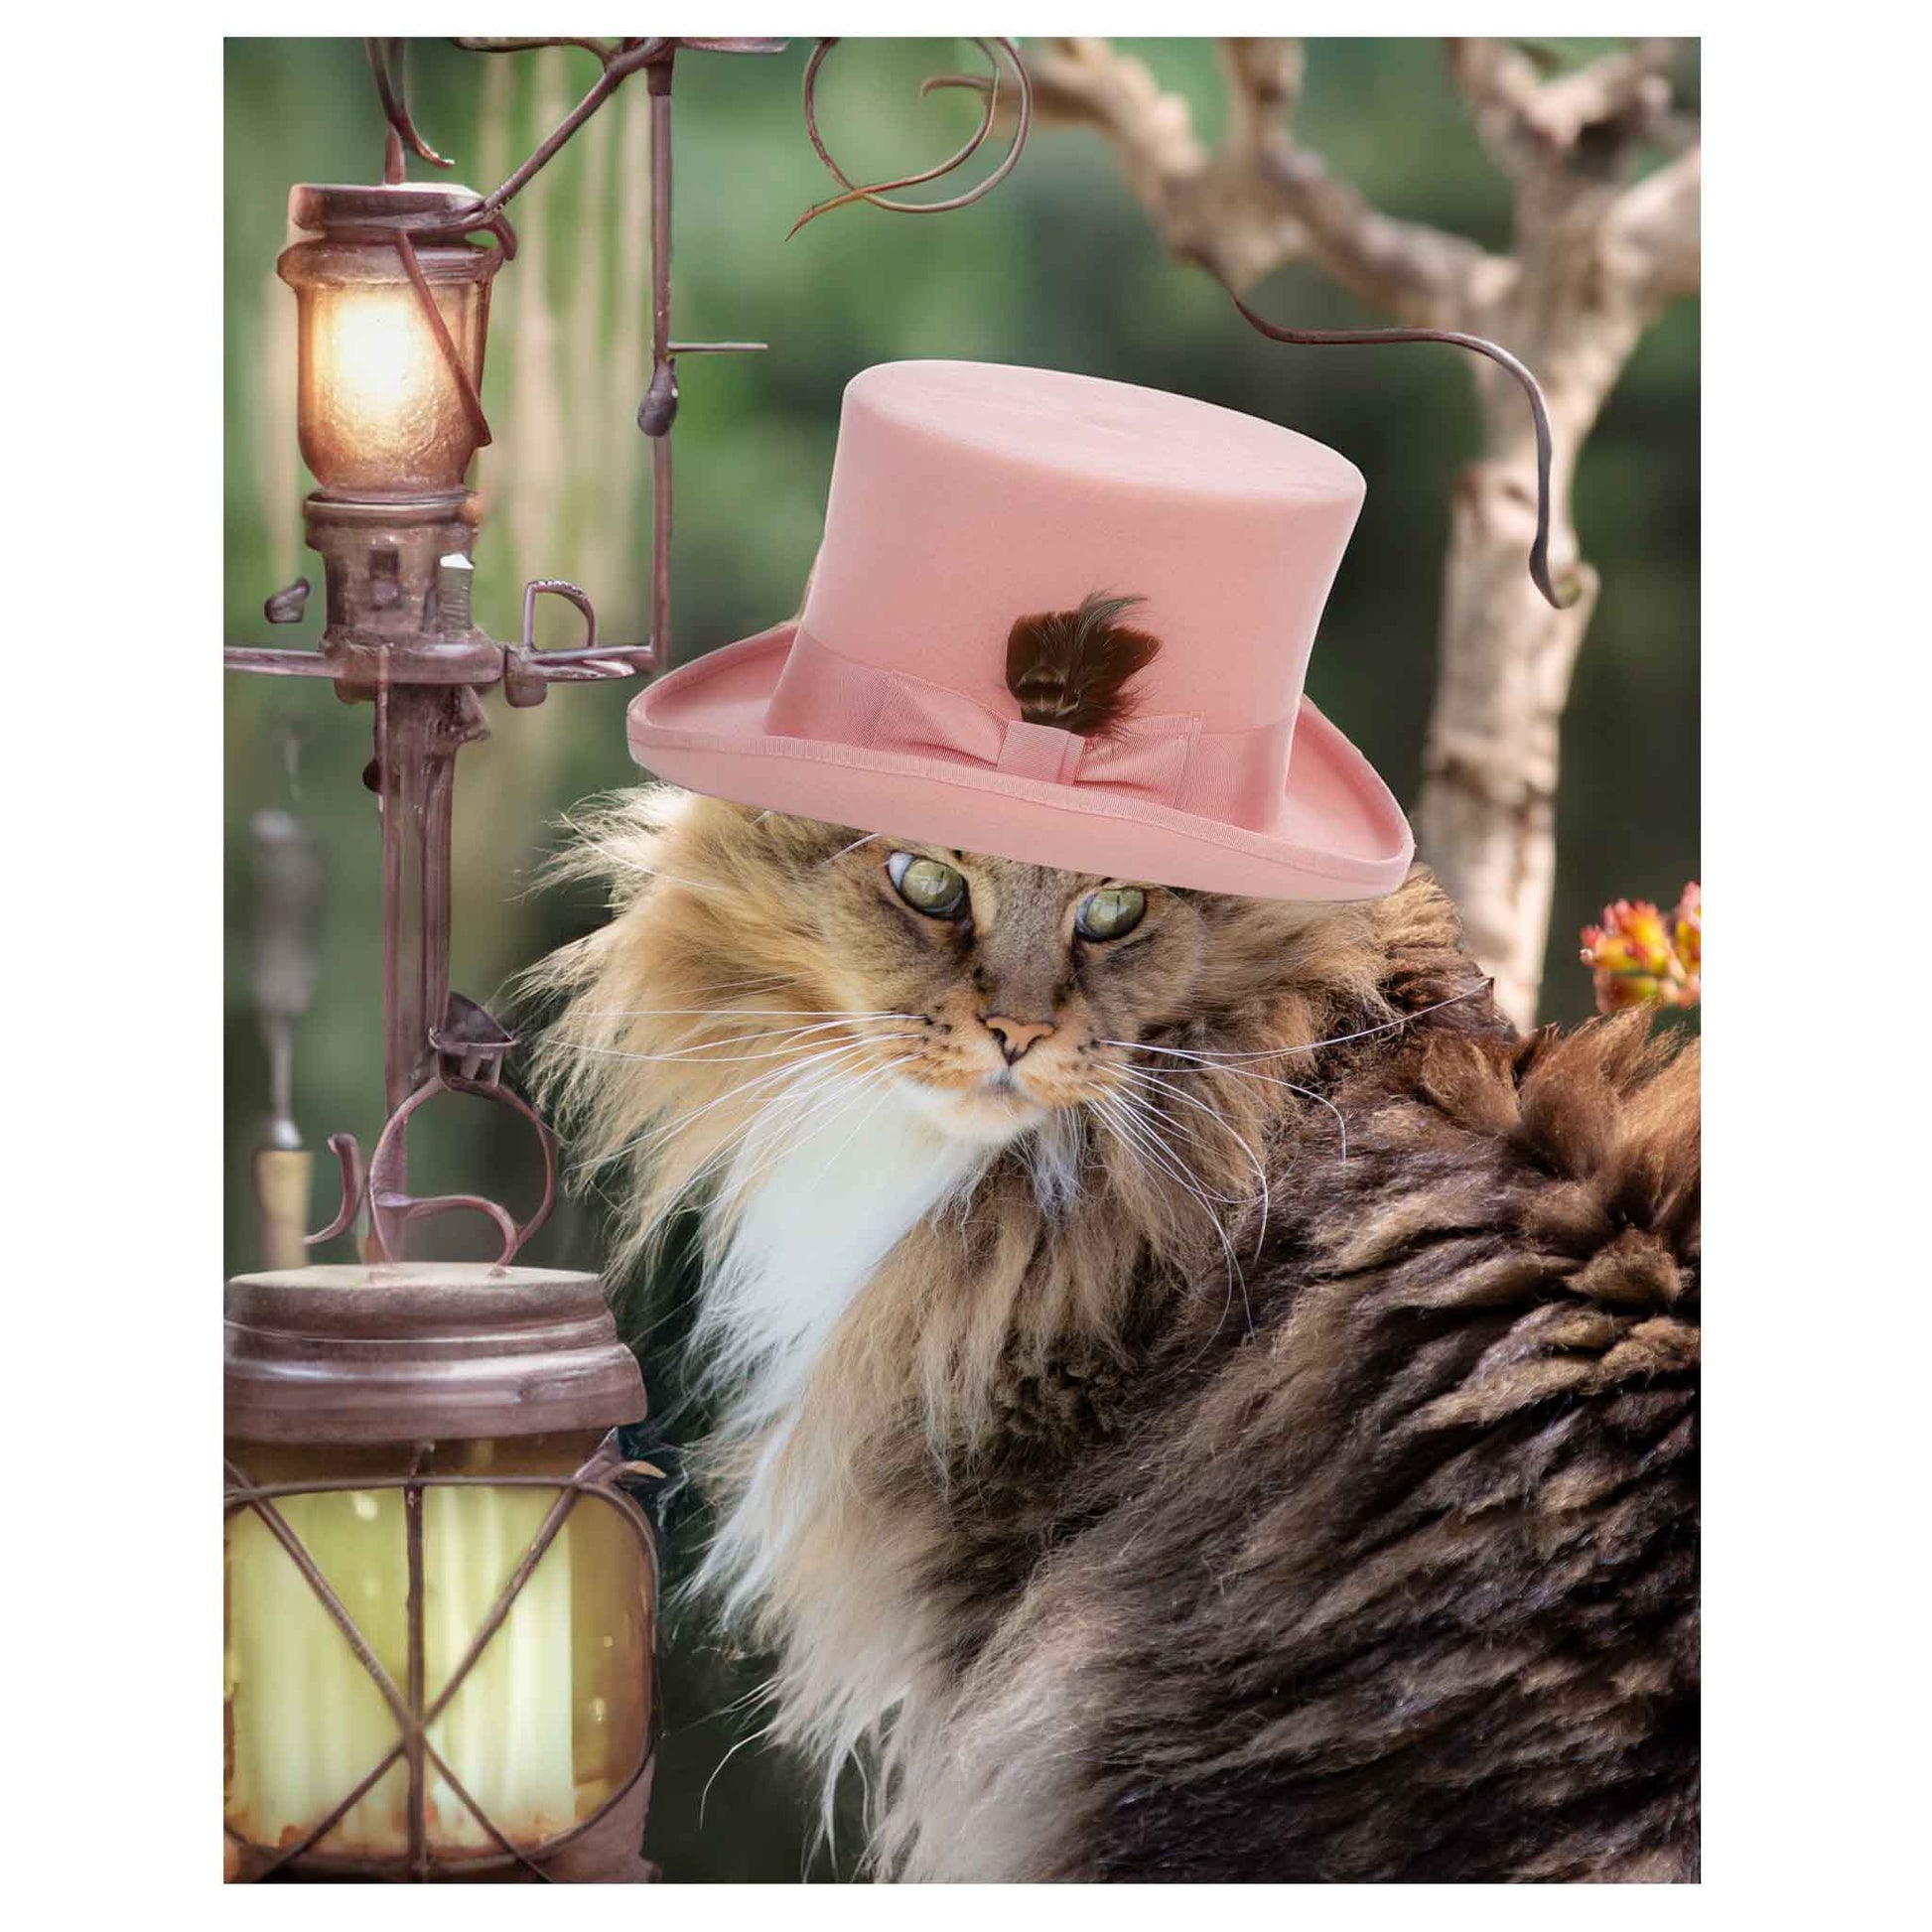 Charles Dean Carpino, photograph, Maine coon cat, computer generated background, steampunk, cat in hat, colorful, whimsical, photo, 8x10,  matted and framed 11x14